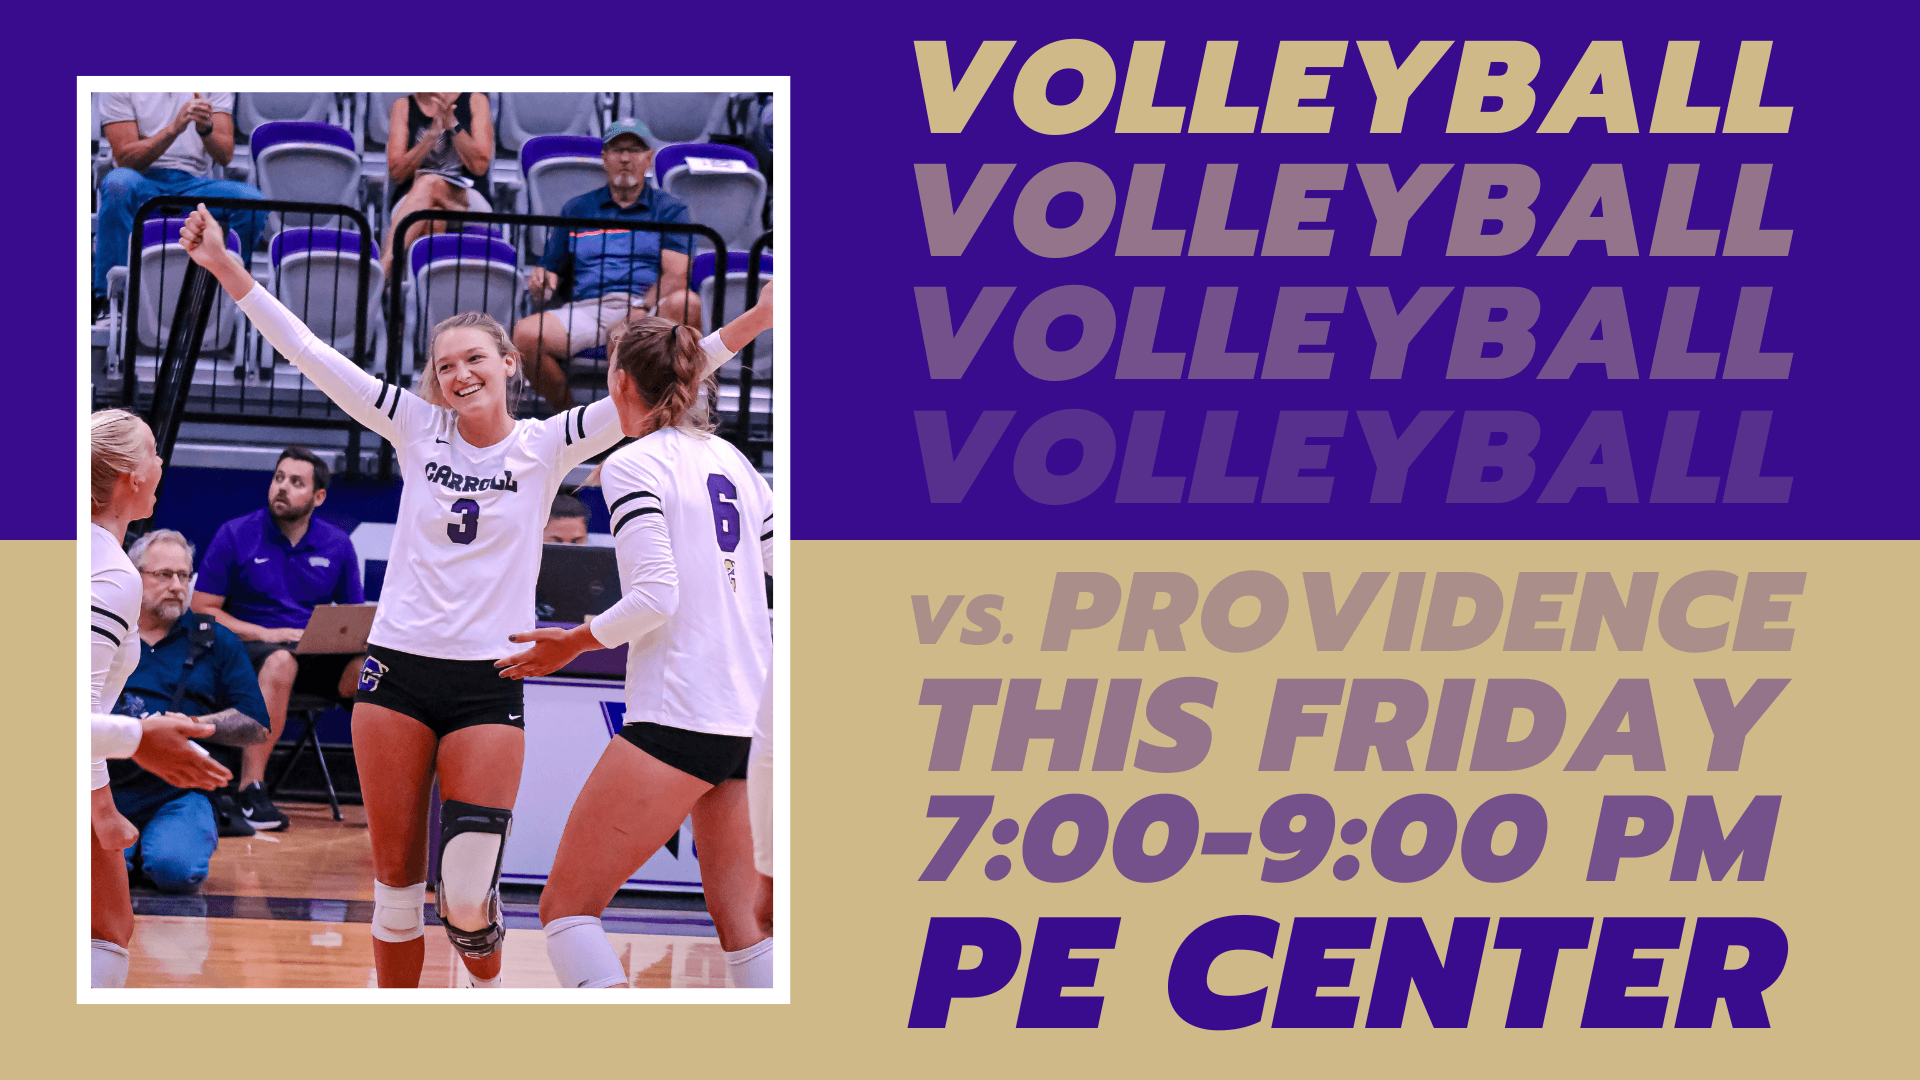 Volleyball vs. Providence poster